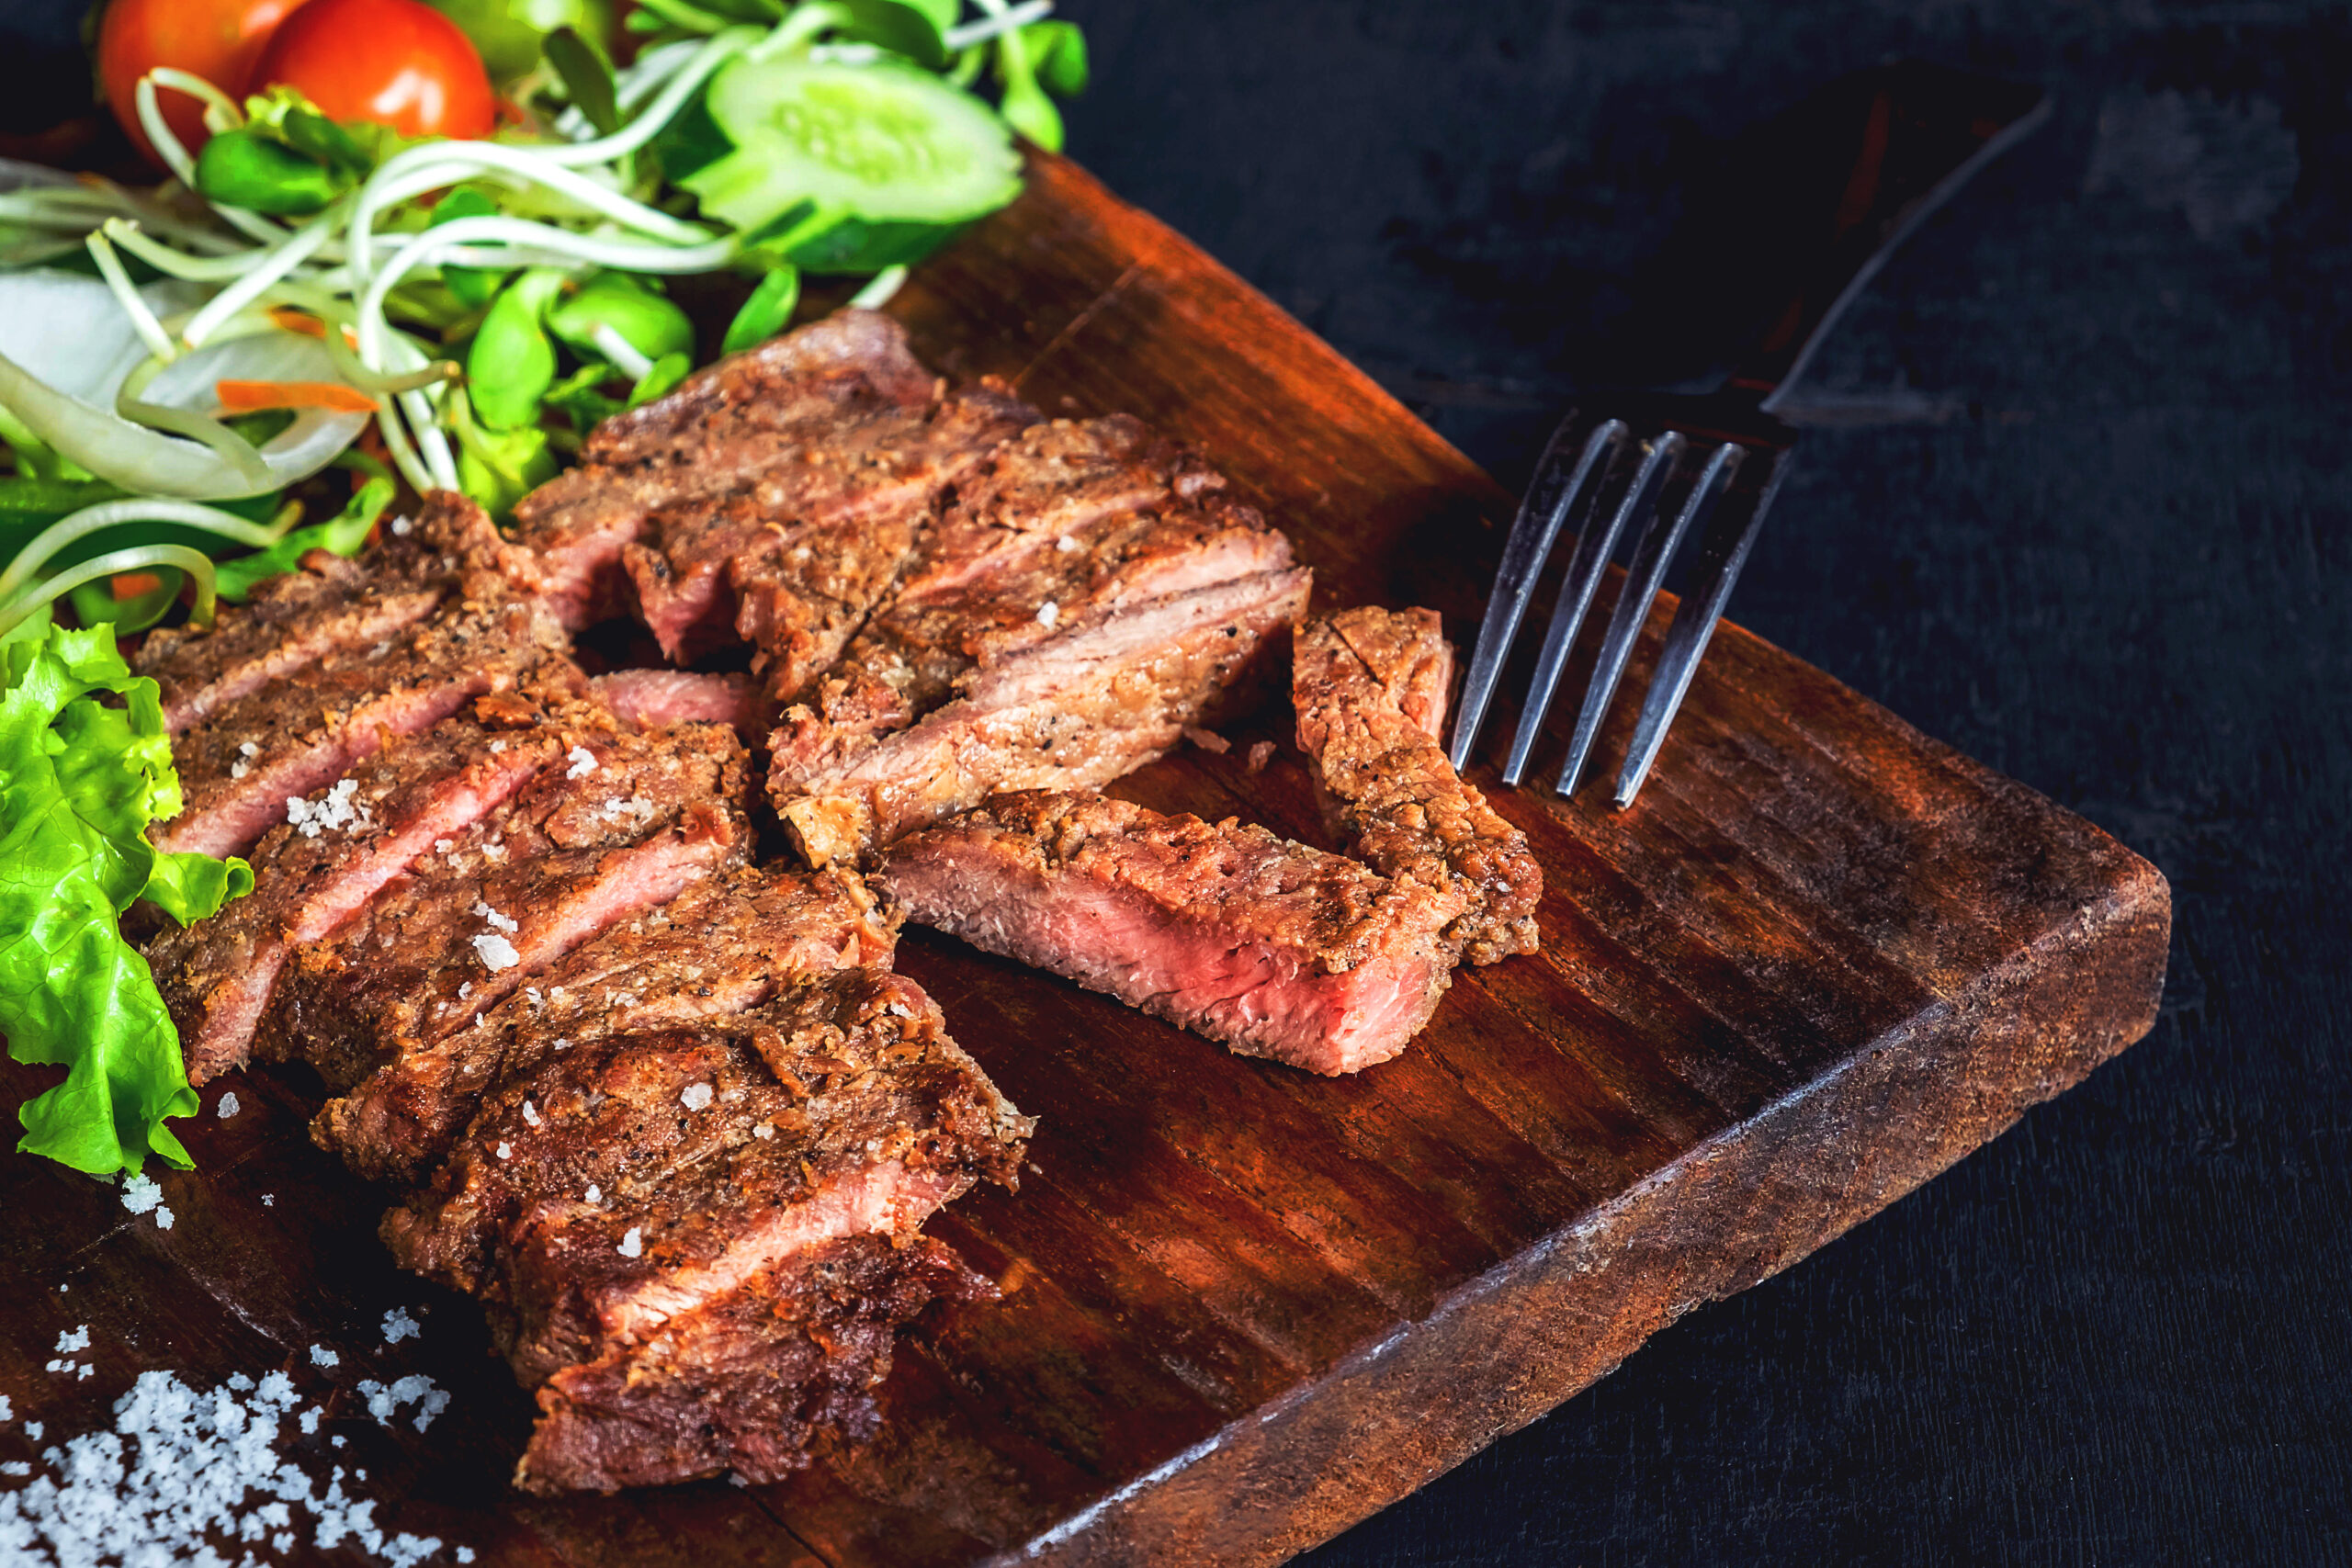 Grilled beef steaks, Image courtesy of Vecteezy